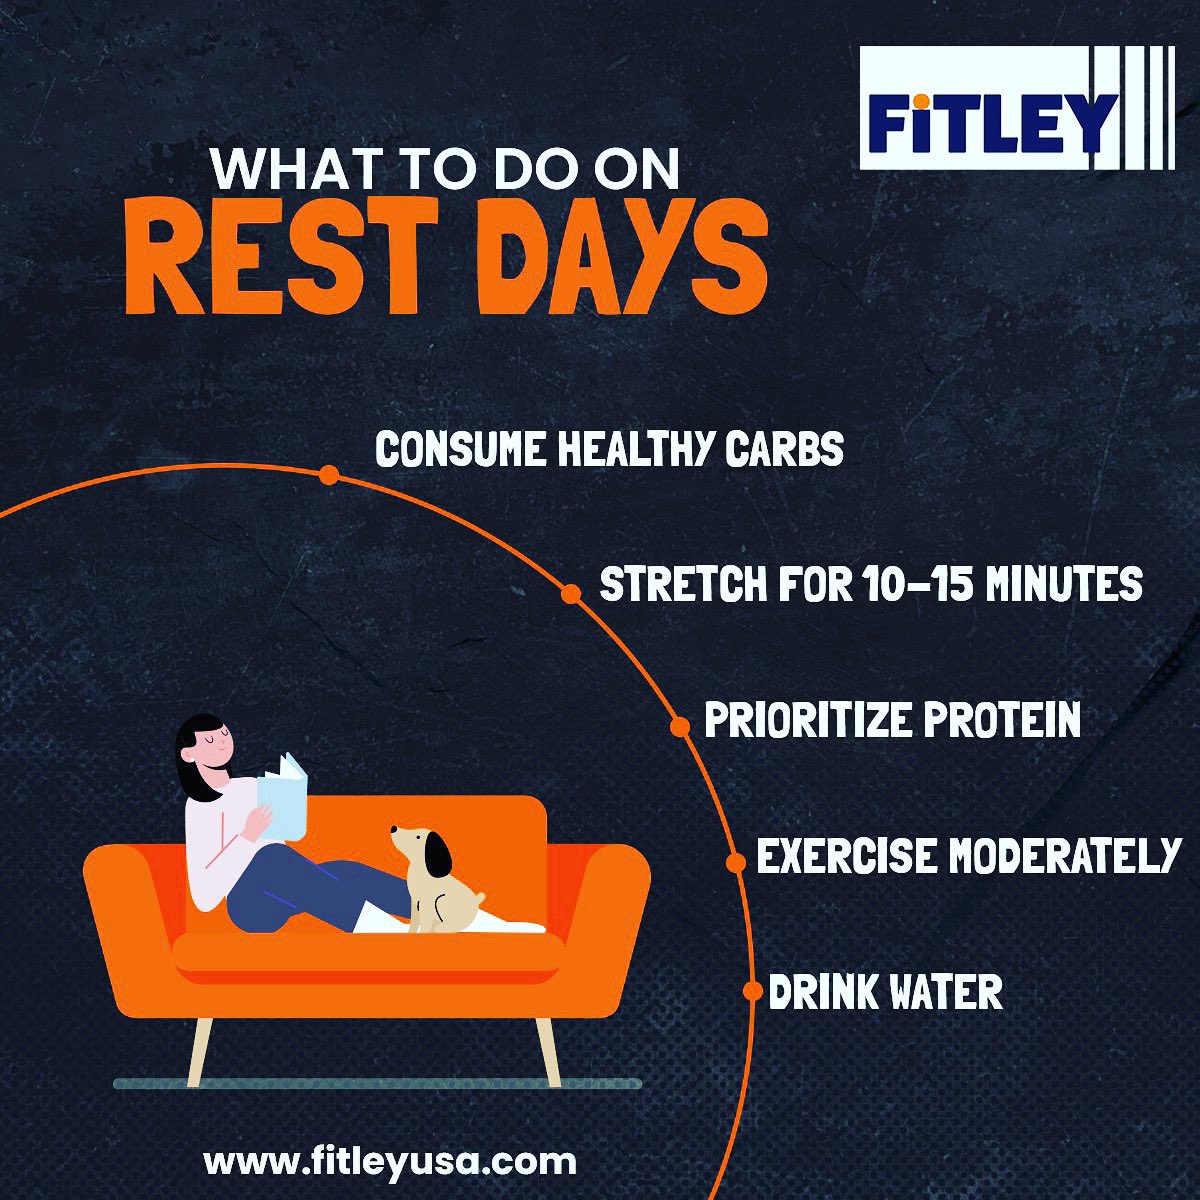 Rest days are just as important as workout days. Take this time to recharge and rejuvenate your body and mind. 💆‍♀️

#StayFit #GetFit #FitnessGoals #HealthyLifestyle #homegym #athomeworkout #fitness #gym #workout #motivation #fit  #lifestyle #fitfam #healthy #FitnessGoals